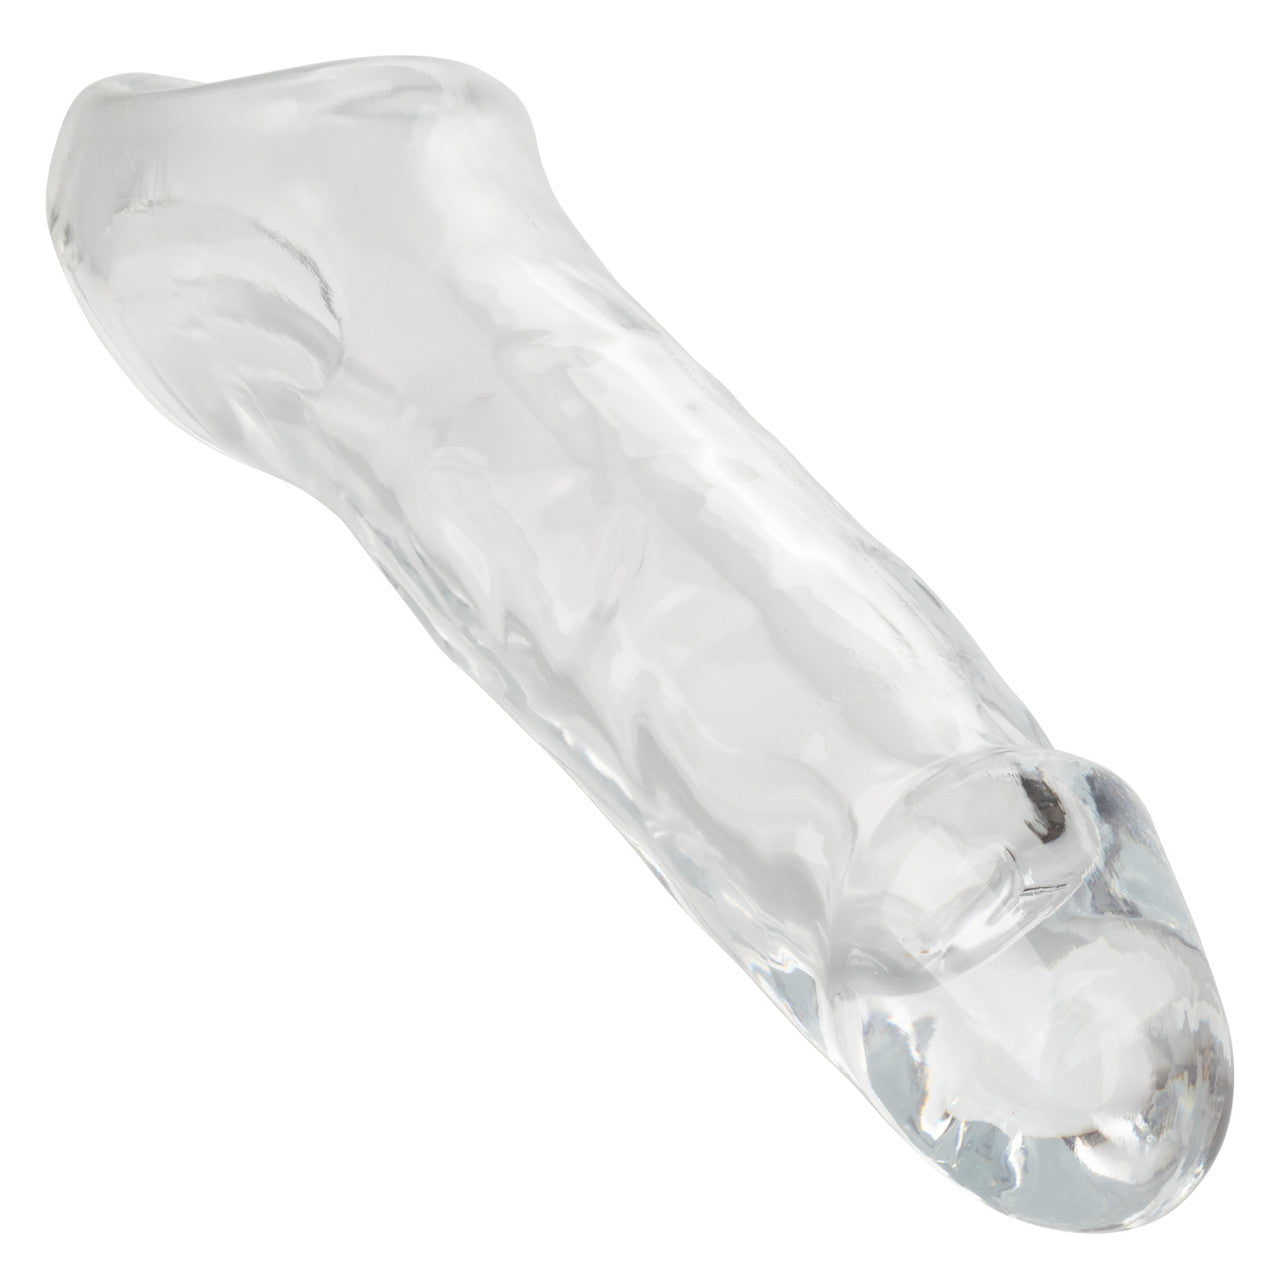 Performance Maxx™ Clear Extension 6.5"